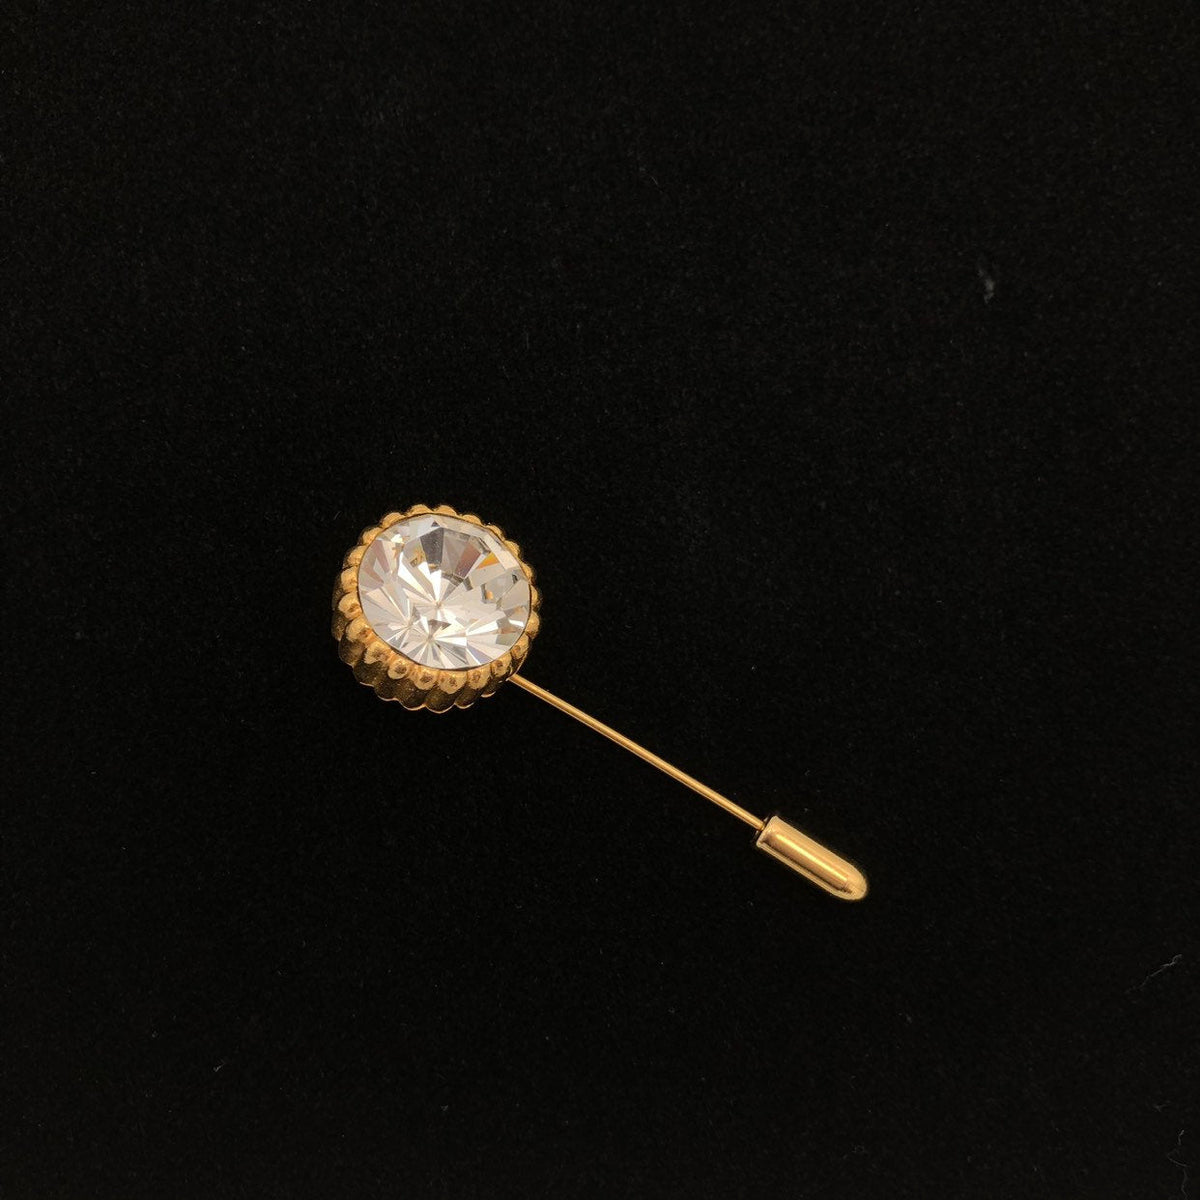 Vintage Gold Kenneth Jay Lane Crystal Stick Pin - 24 Wishes Vintage Jewelry